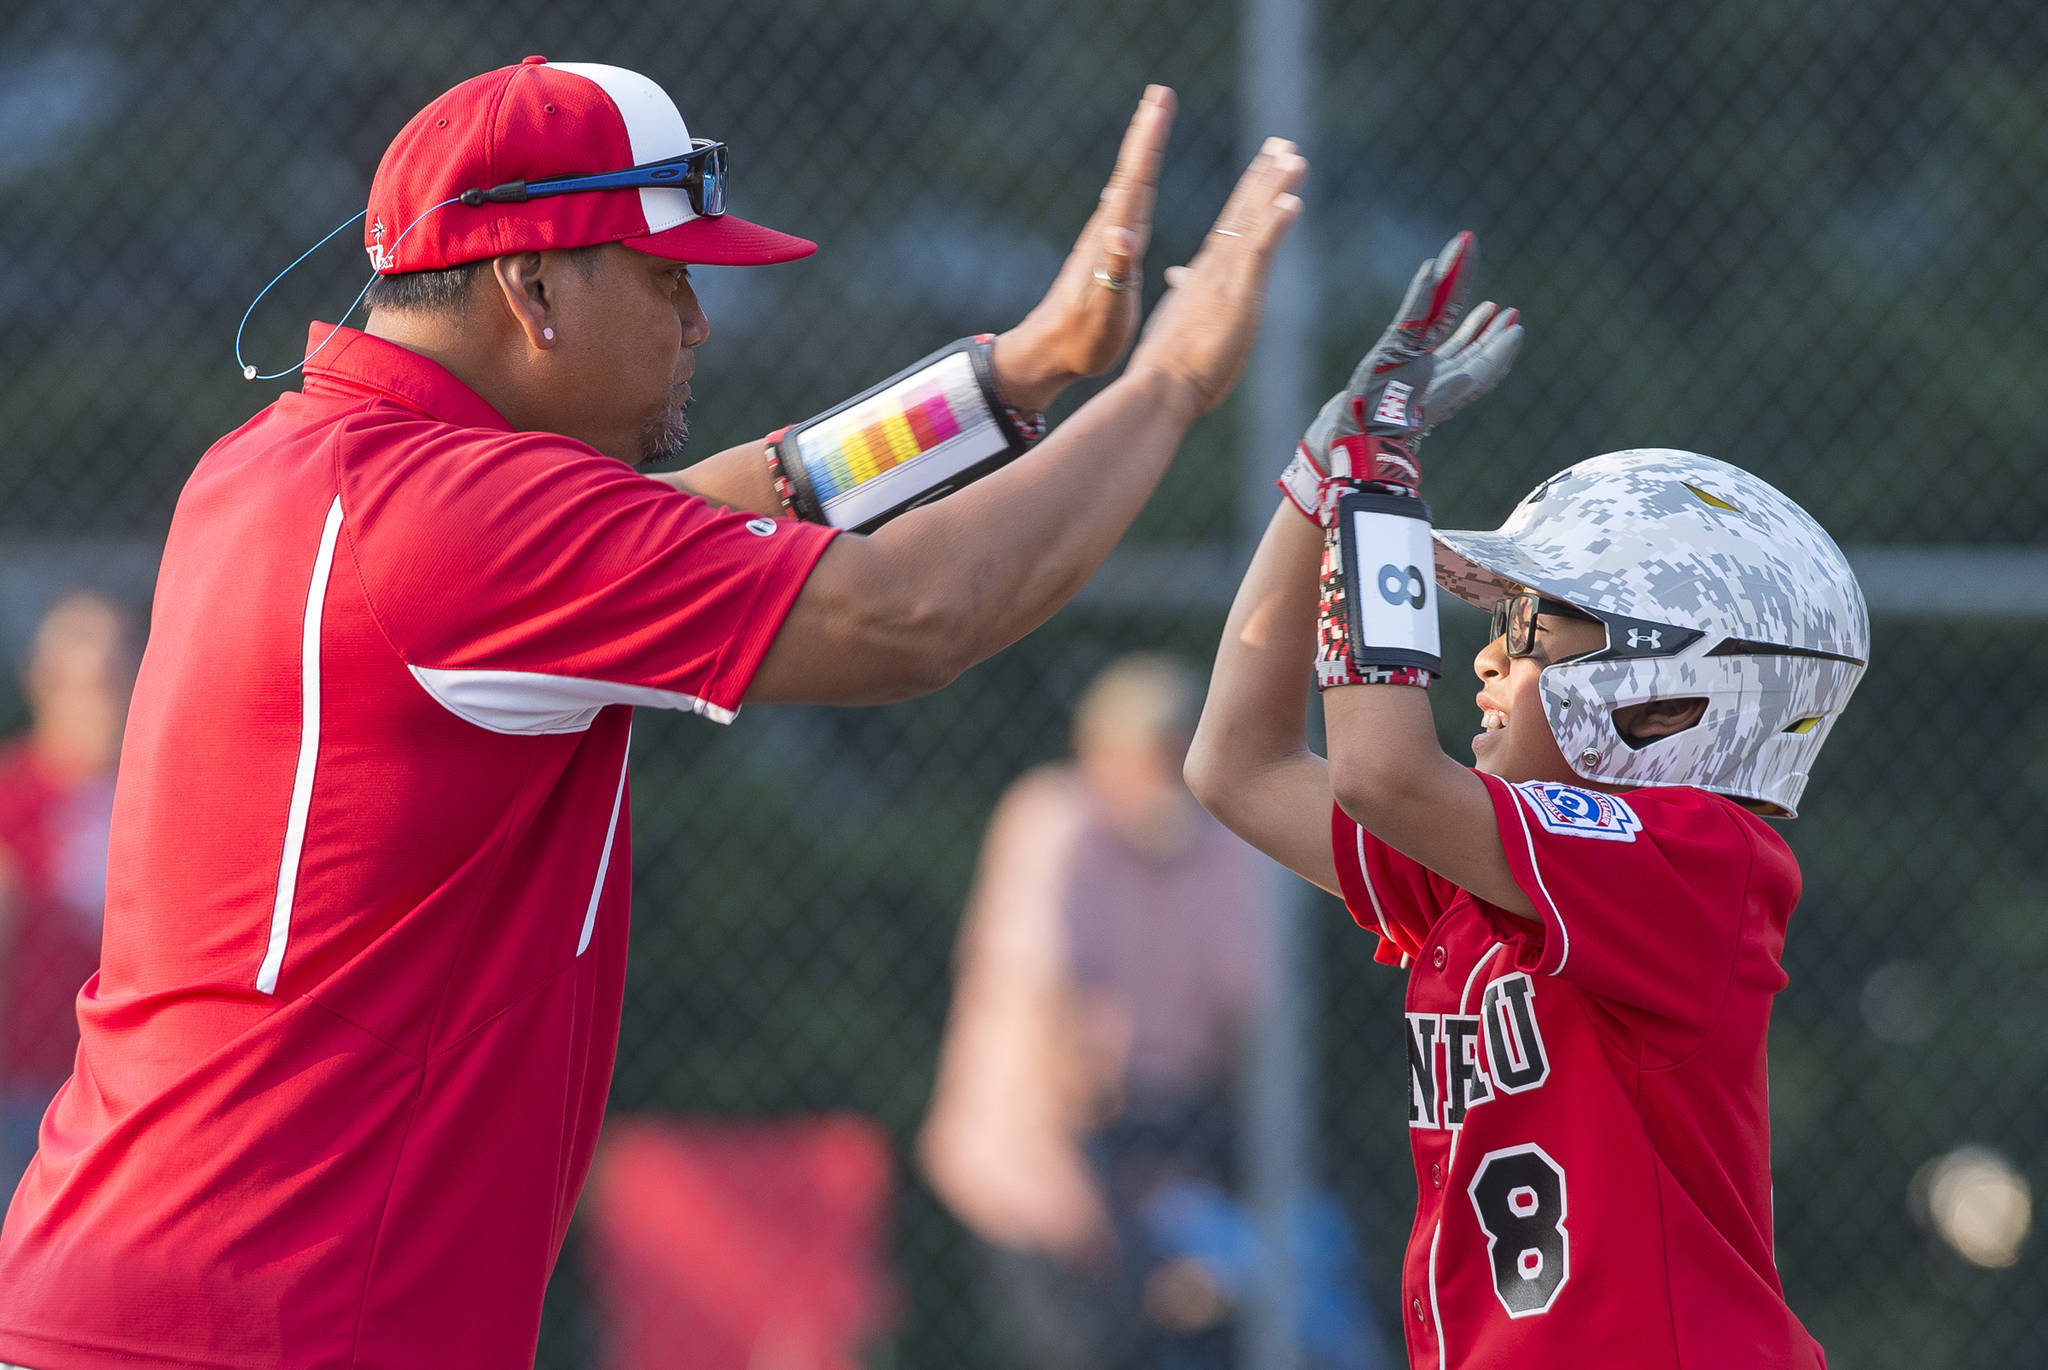 Gastineau Channel’s Erza Vidal is congratulated on a base hit by coach Randy Quinto against Ketchikan in the eighth inning of the Alaska Major Baseball District 2 Championship Game at Miller Field on Tuesday. (Michael Penn | Juneau Empire)